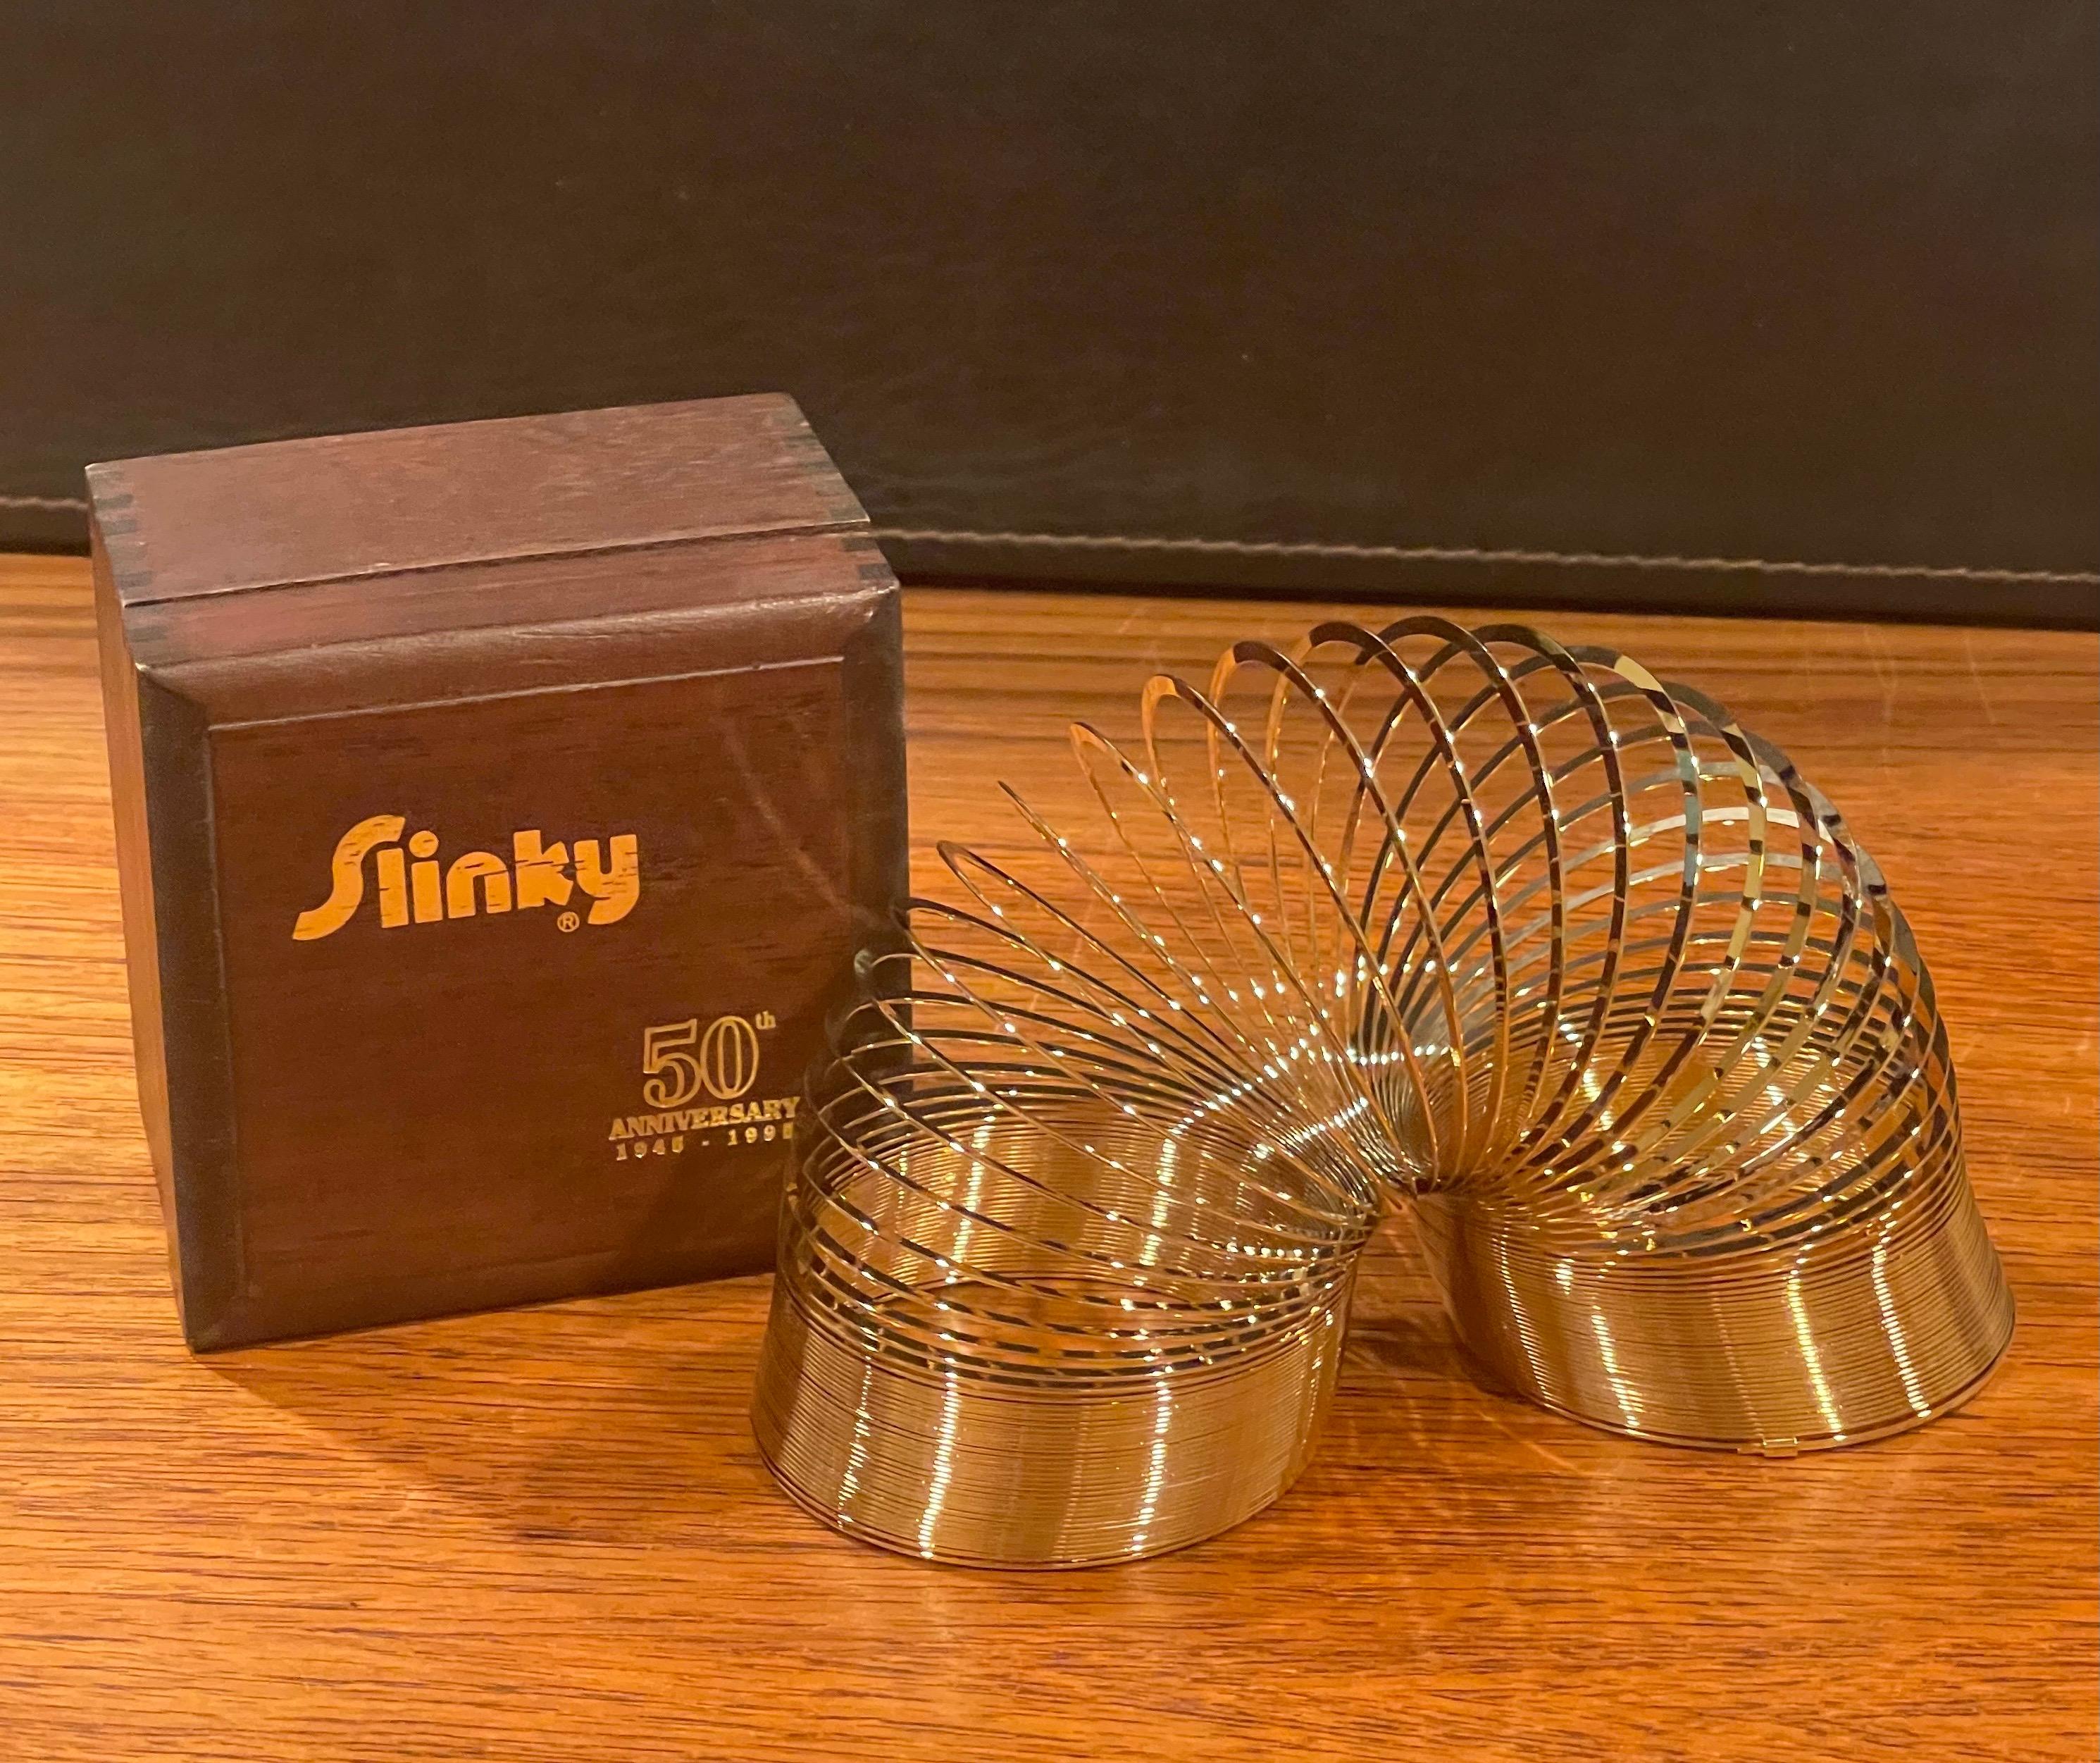 50th Anniversary gold-plated brass Slinky toy in wood box, circa 1995. This item is in brand new condition in the original plastic bag; appears to never have been played with. This Slinky was released in 1995 to celebrate the toy's 50th anniversary;